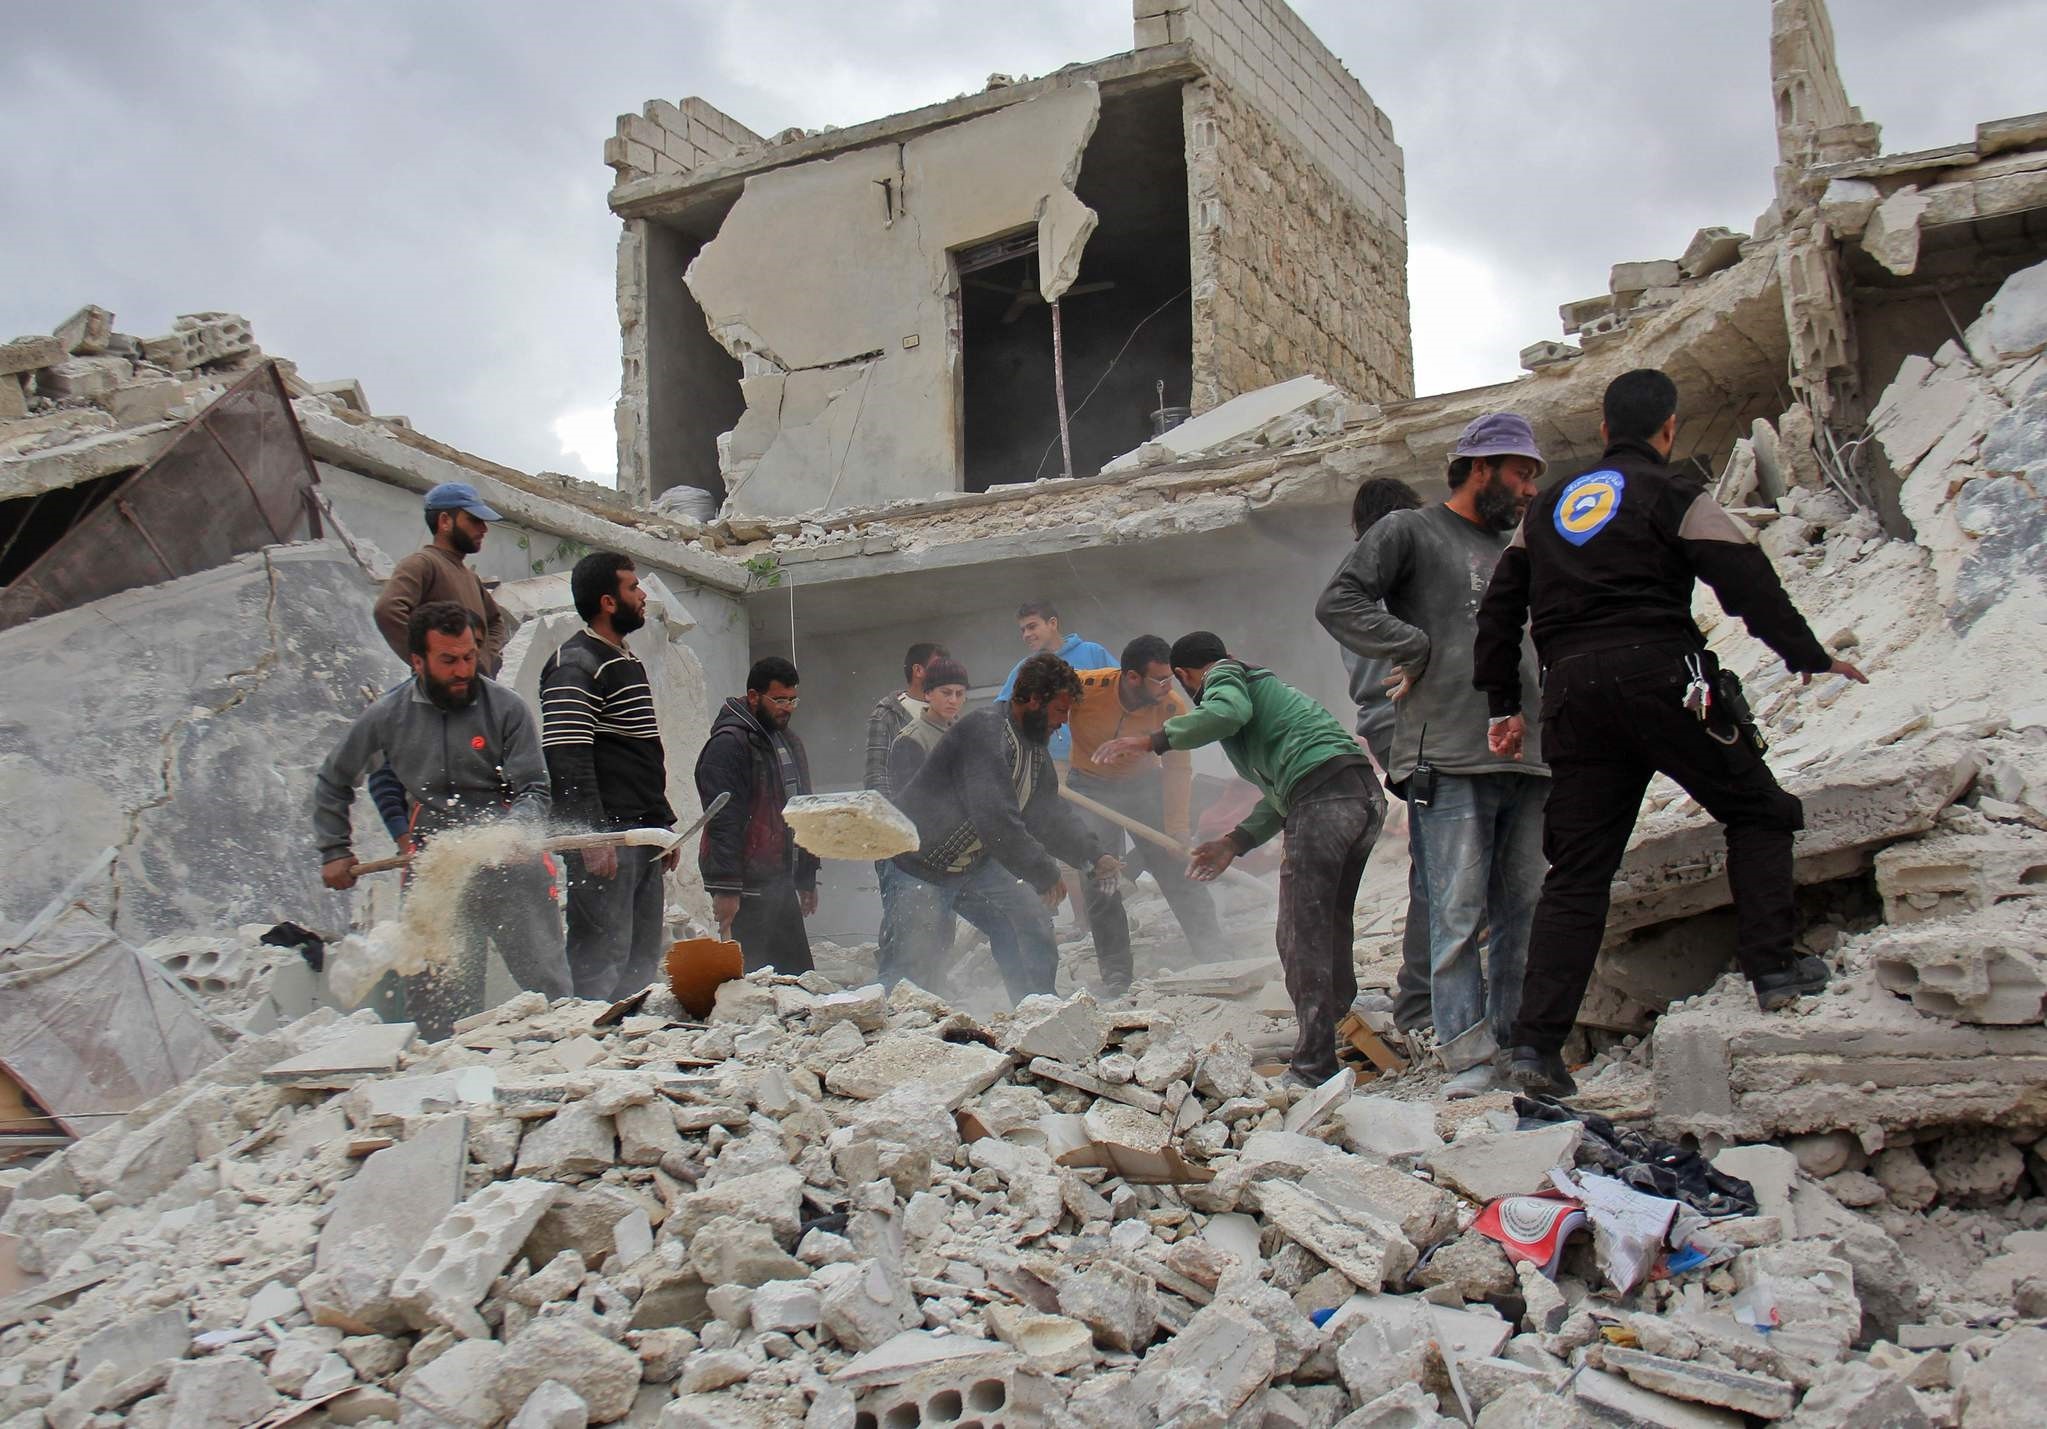 Rescuers and civilians inspect a destroyed building in the Syrian village following air strikes by Syrian and Russian warplanes on November 16, 2016. (AFP Photo)